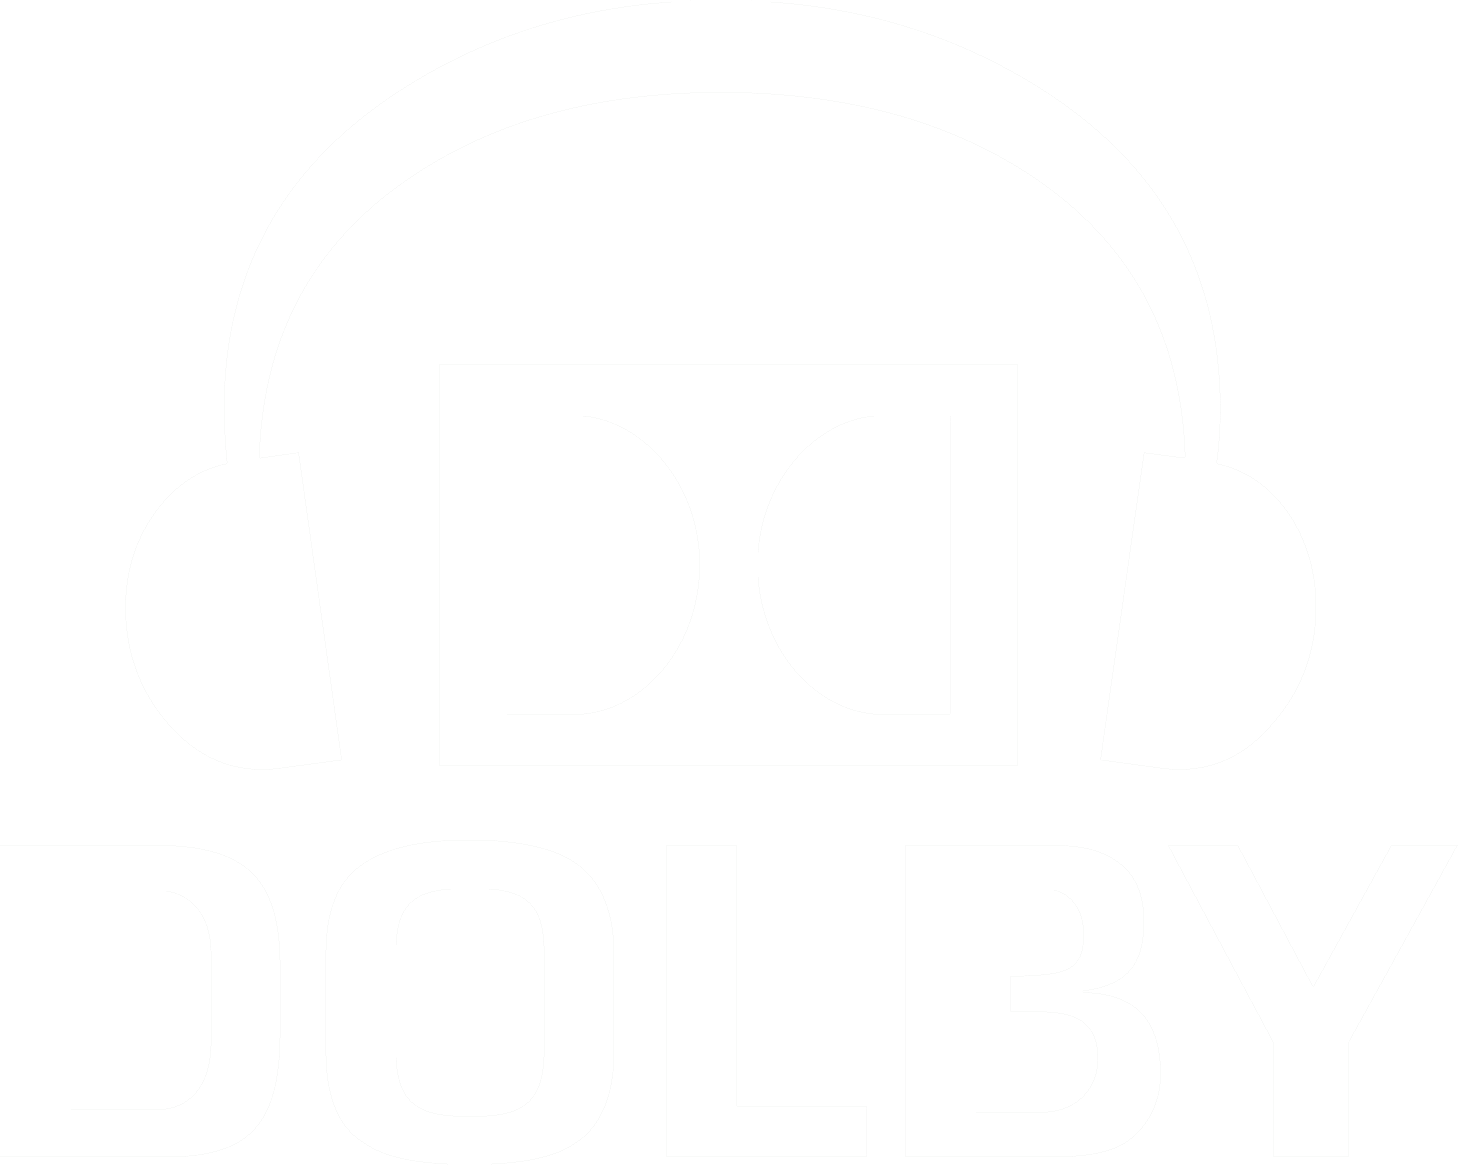 Dolby Logo - Image - Dolby-logo-white.png | ICHC Channel Wikia | FANDOM powered ...